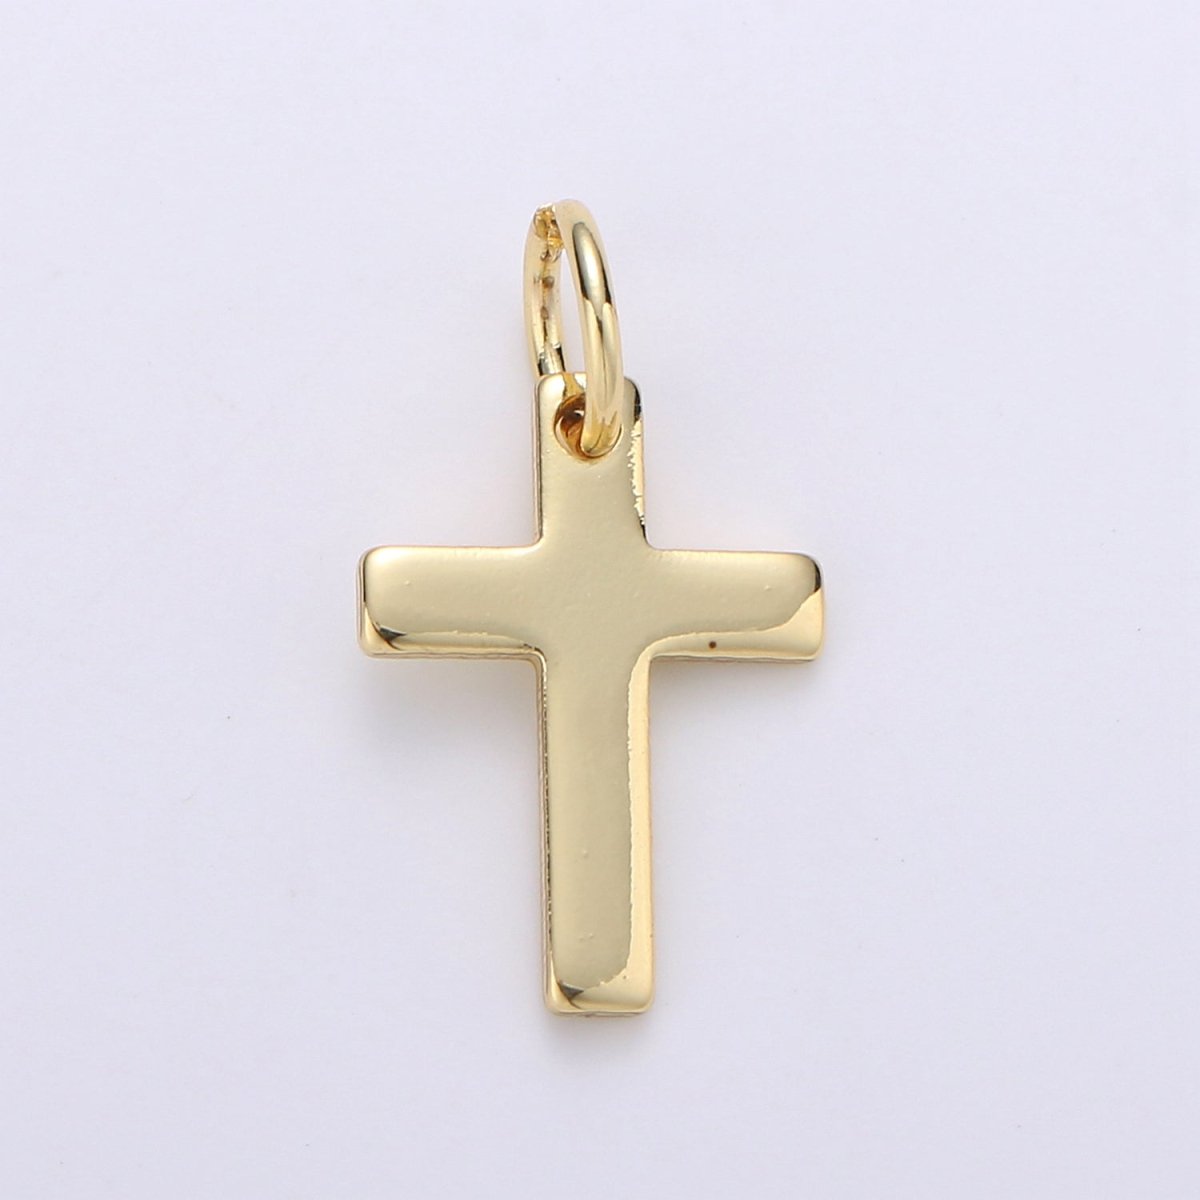 Dainty 14k Gold Filled Cross Charm for Bracelet Earring Necklace Rosary Component Minimalist Religious Jewelry Charm D-482 - DLUXCA